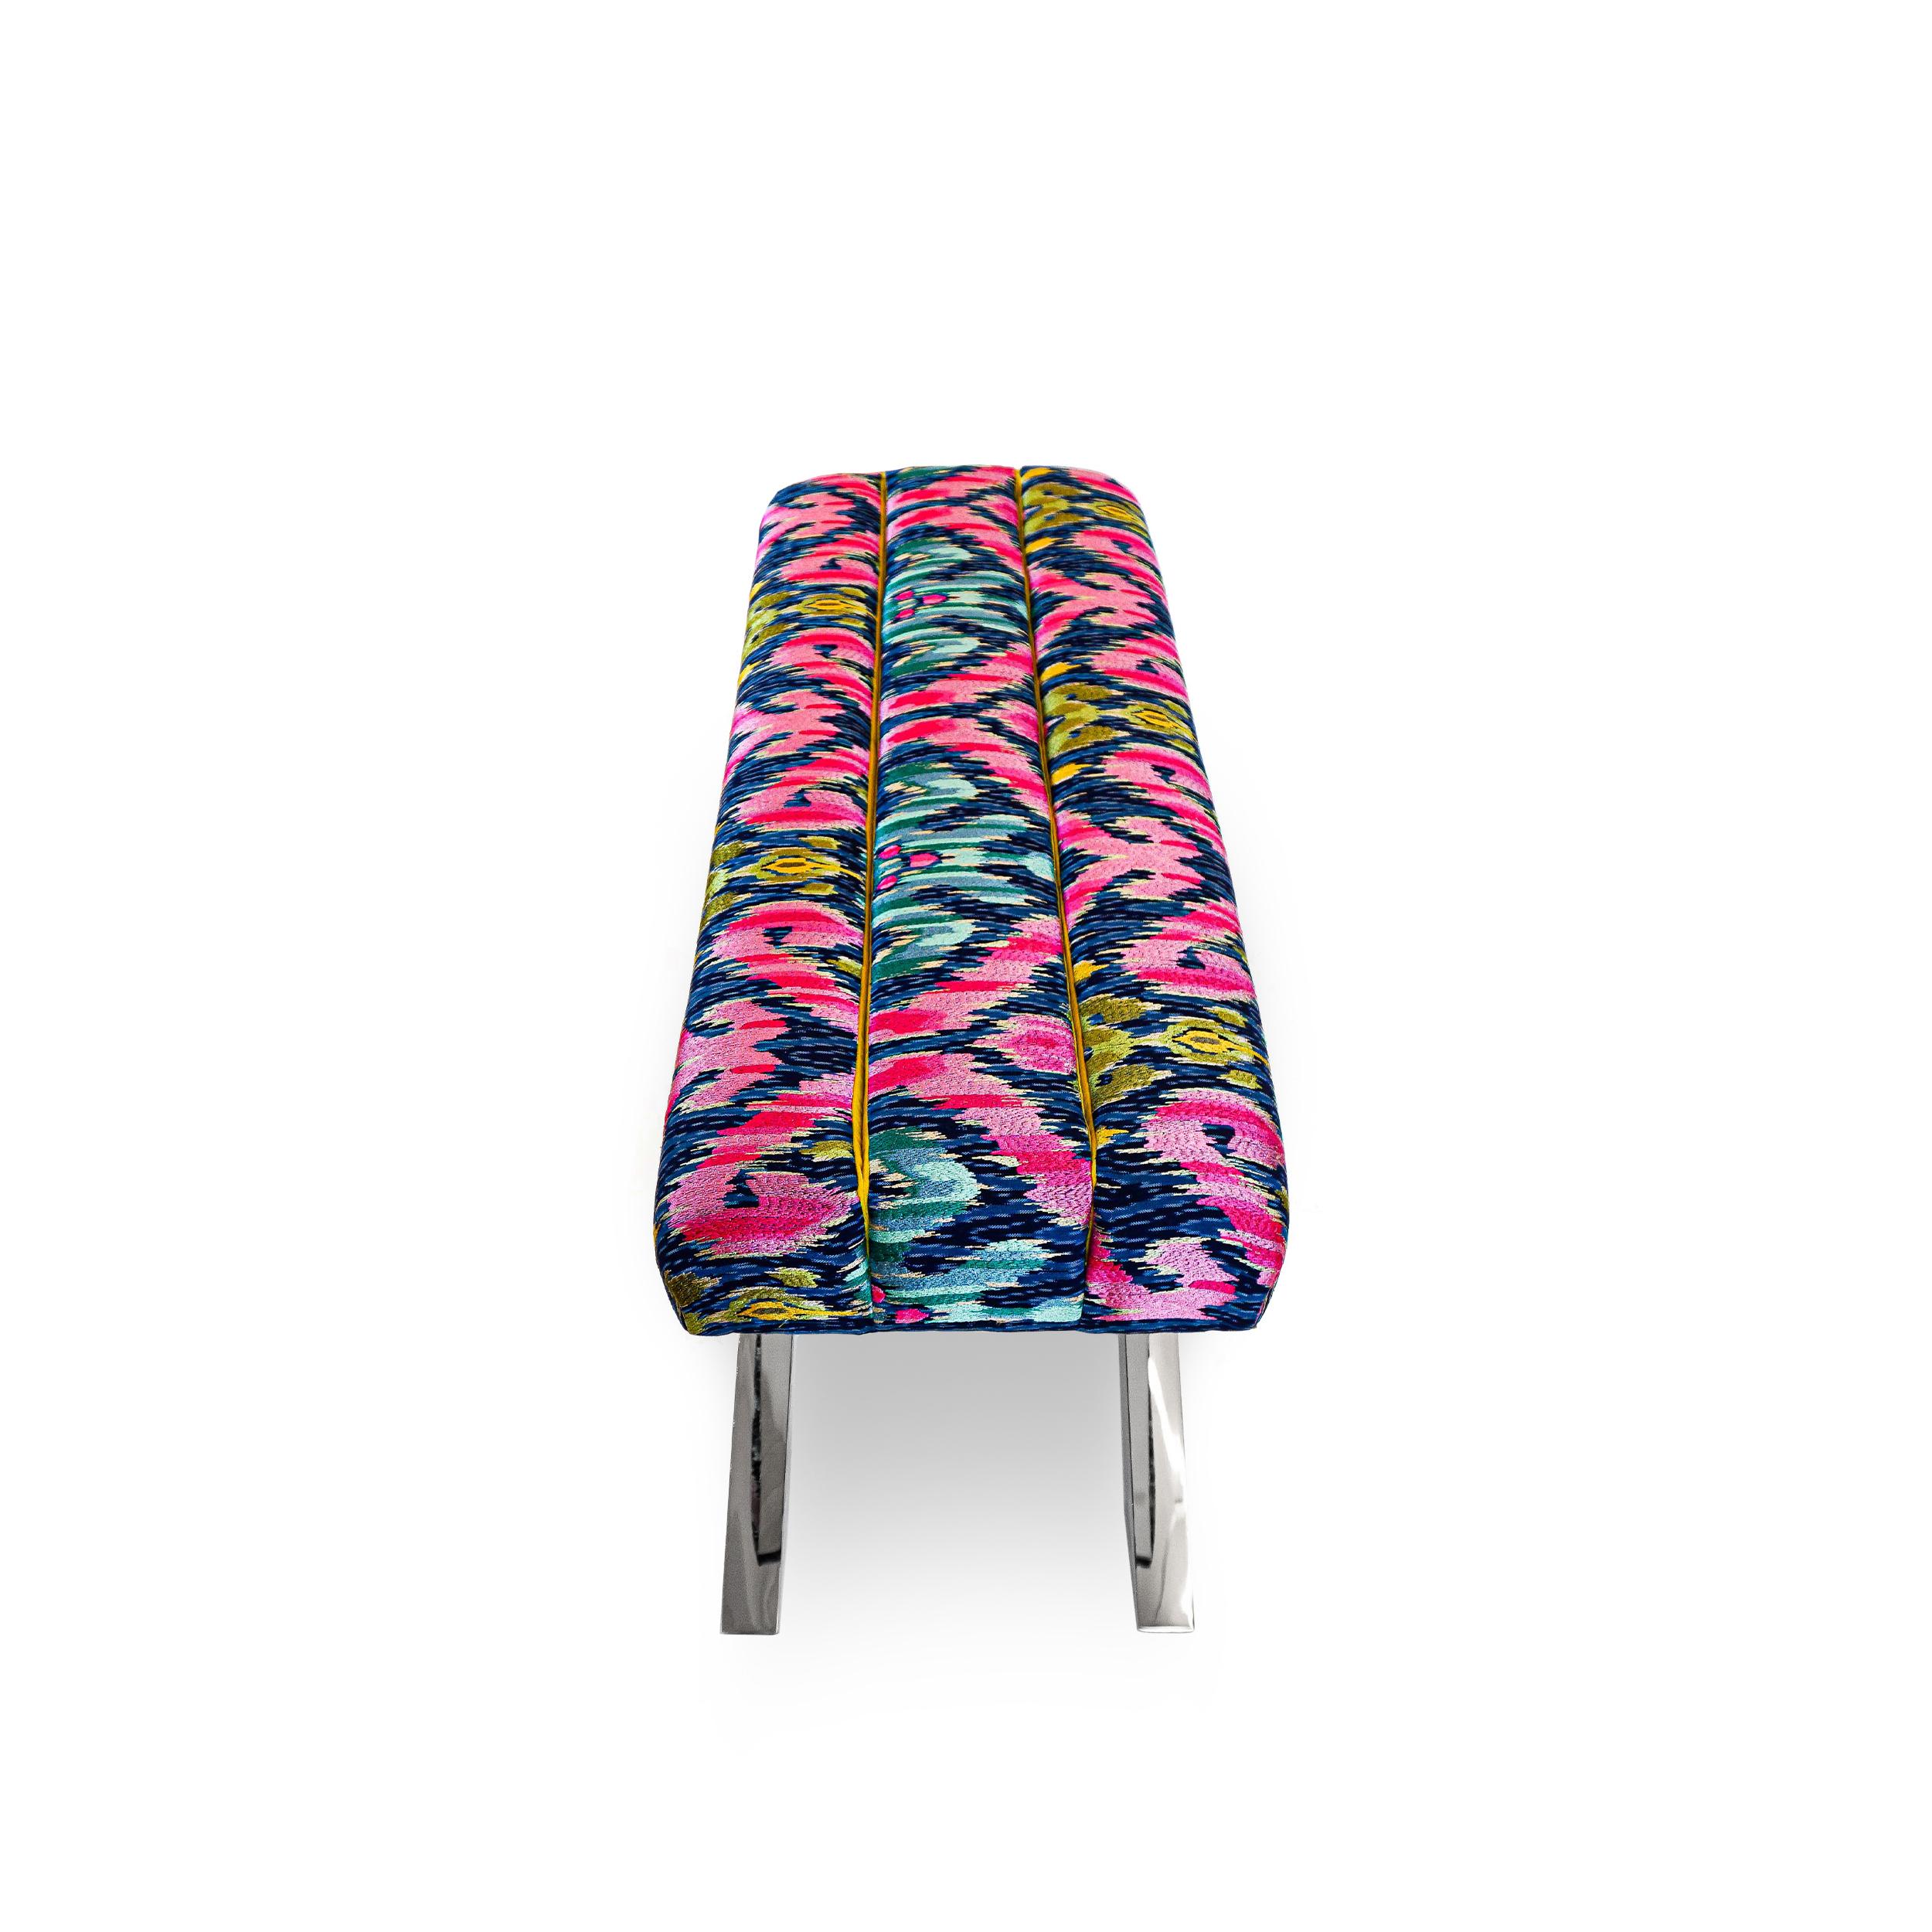 Modern Multi-Colored Ikat Woven Fabric Bench with X Crossed Legs 1